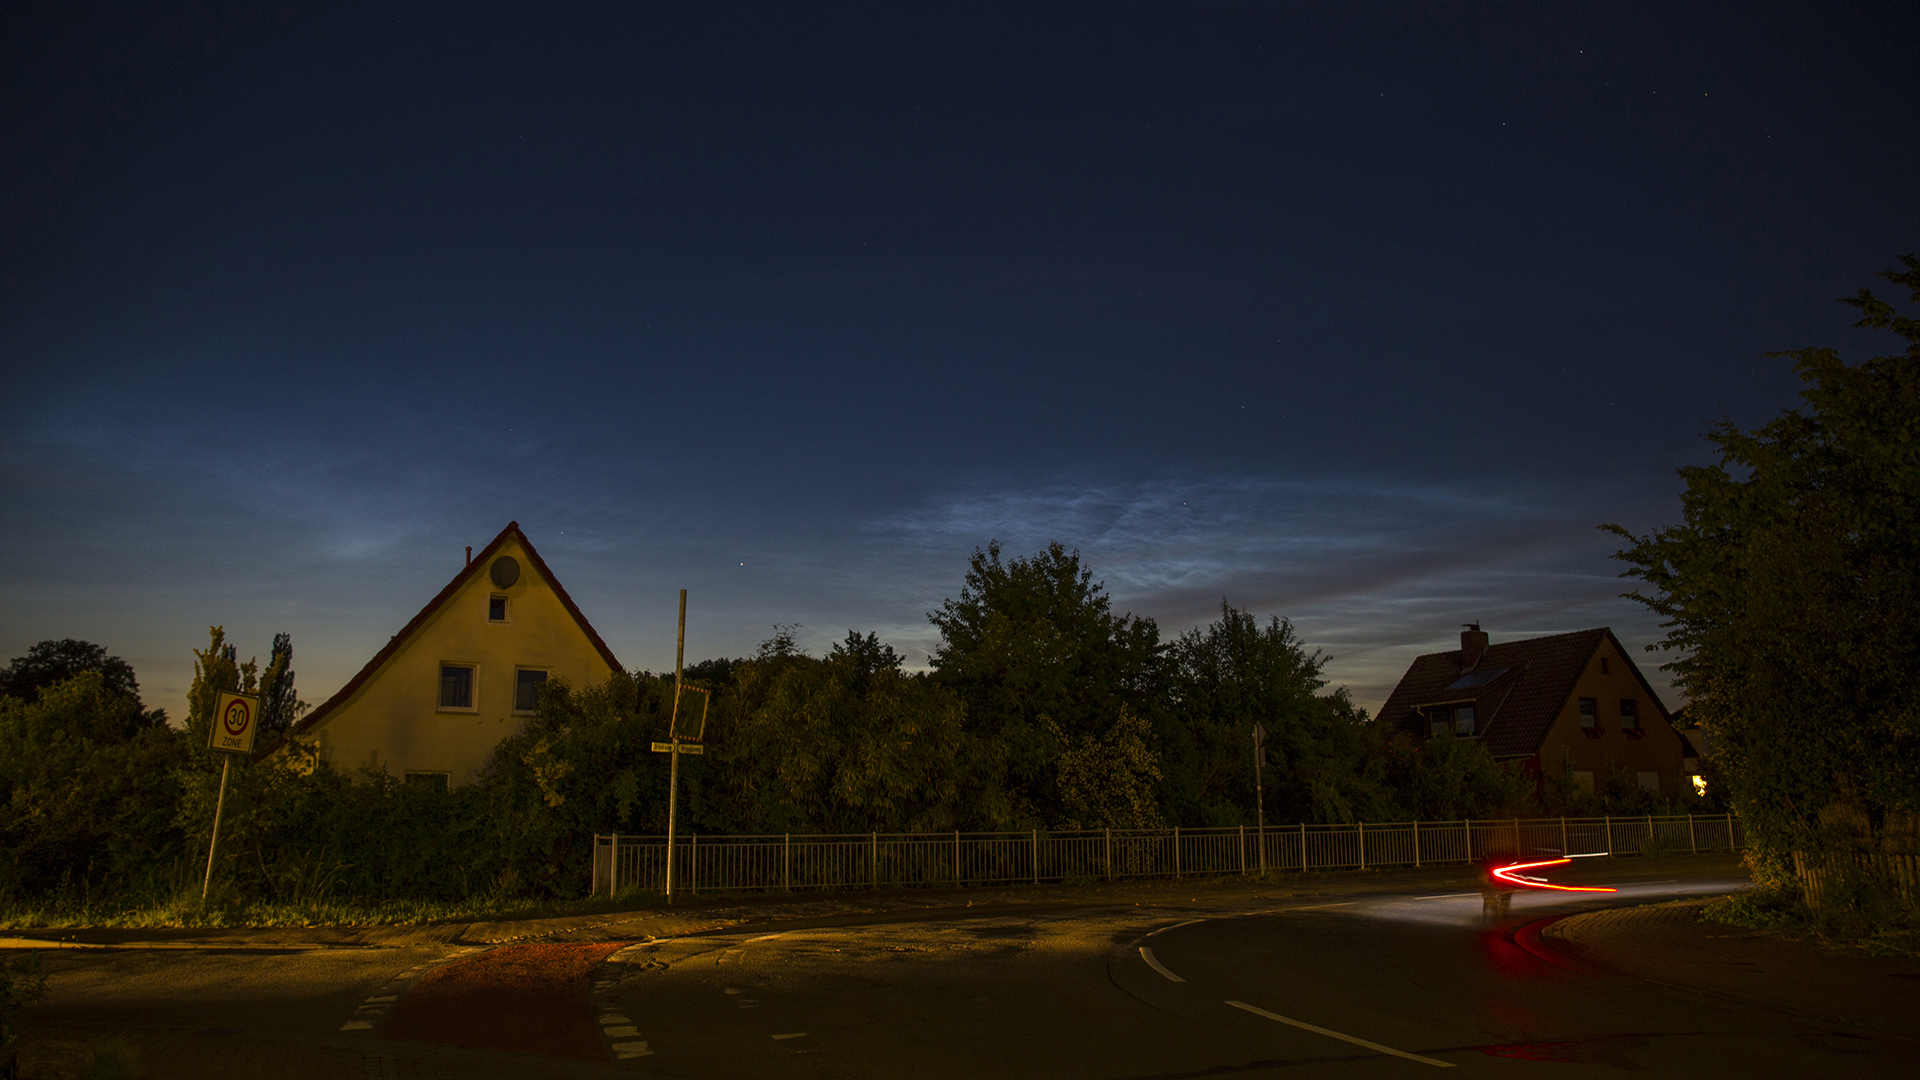 Noctilucent Clouds (2019:06:15 21:42:22 UT, Canon EOS 6D, 2s, f/4, f=24mm, ISO 400)